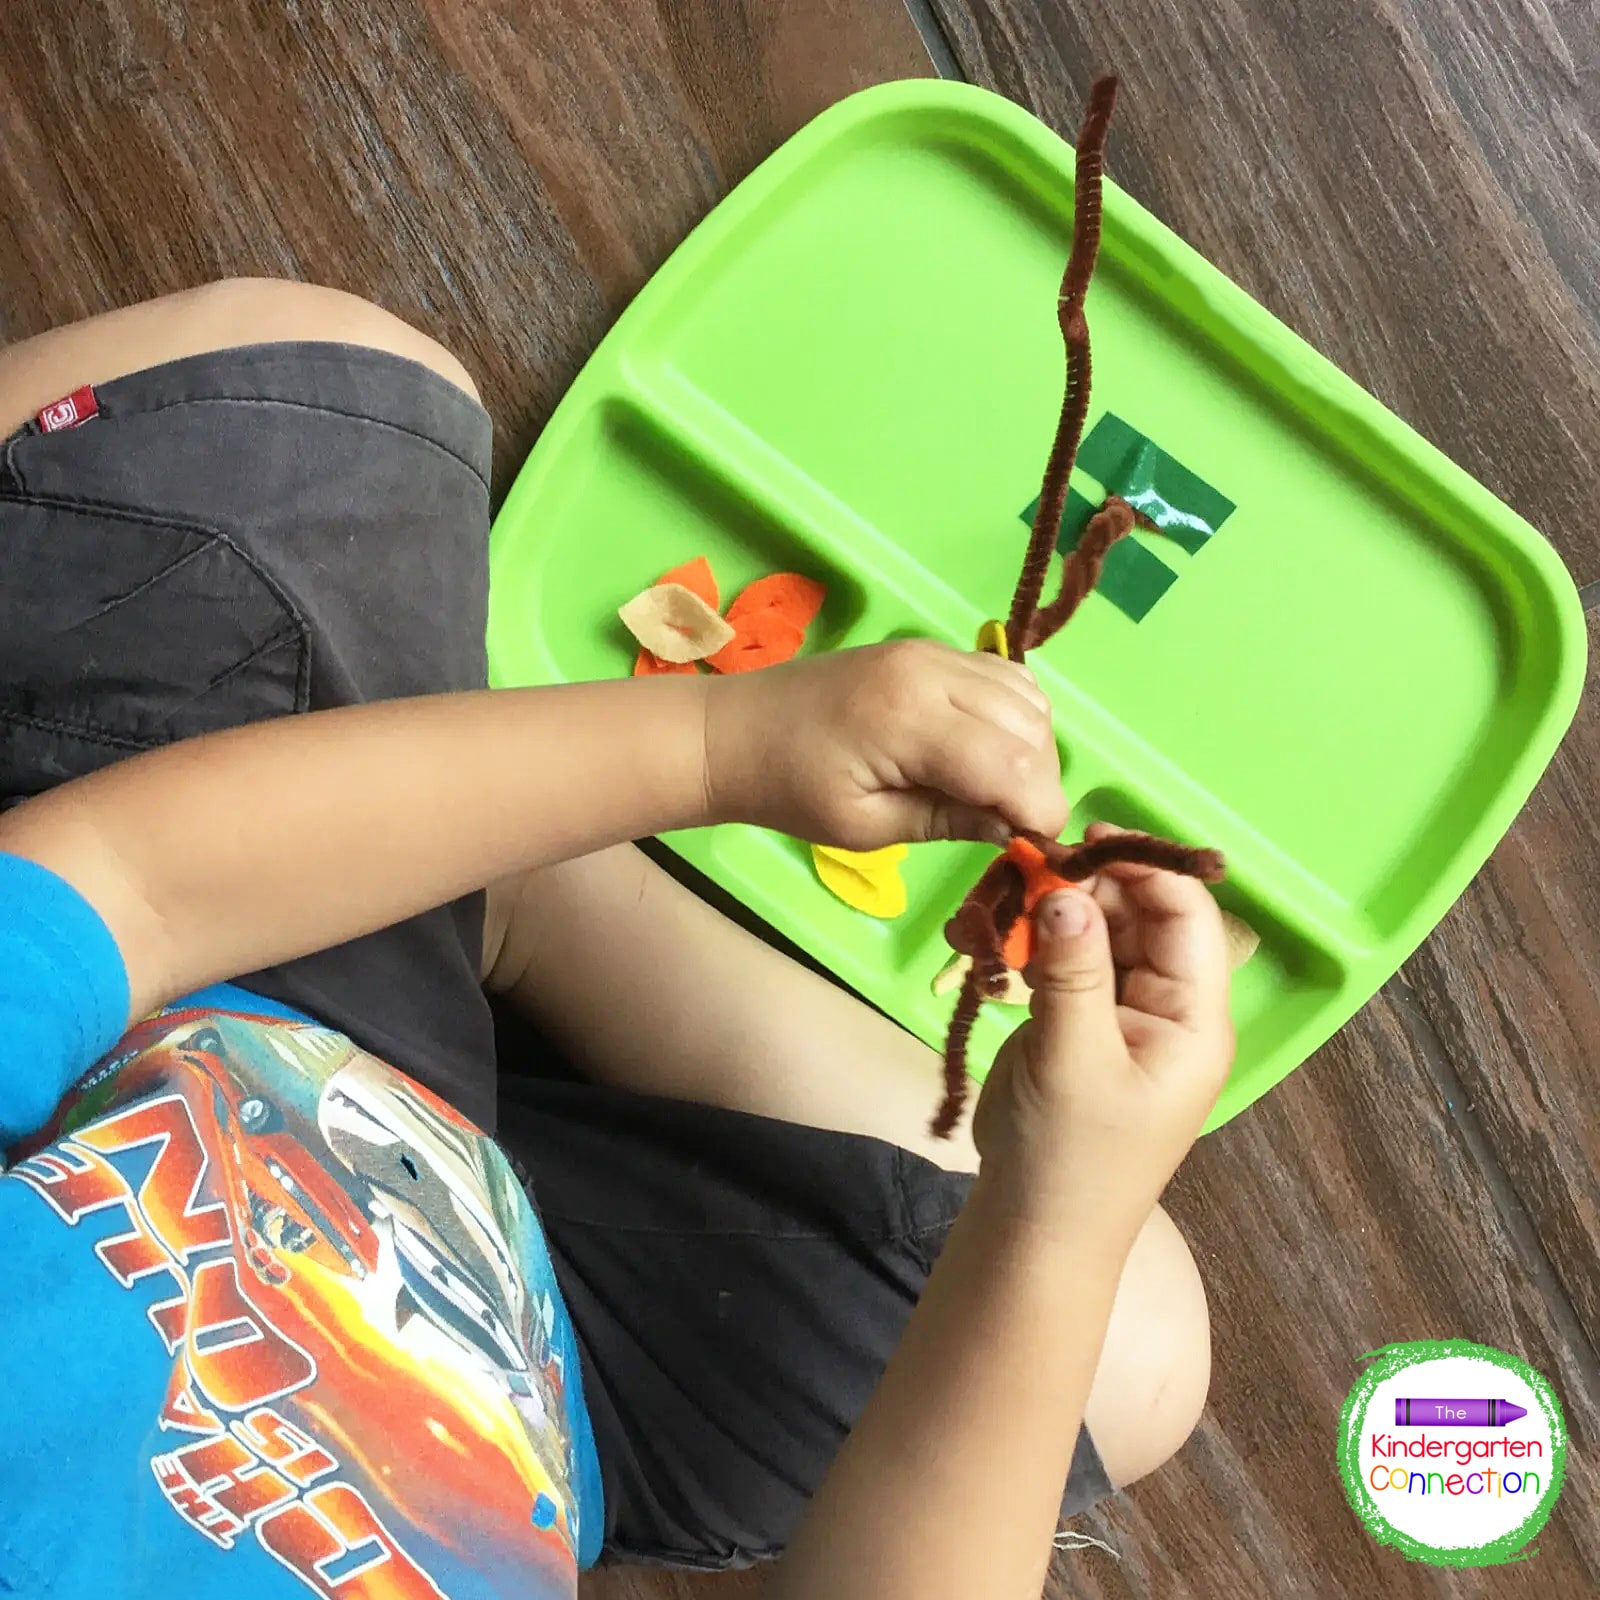 Bend the pipe cleaner into the shape of a tree and attach to a tray securely using tape.